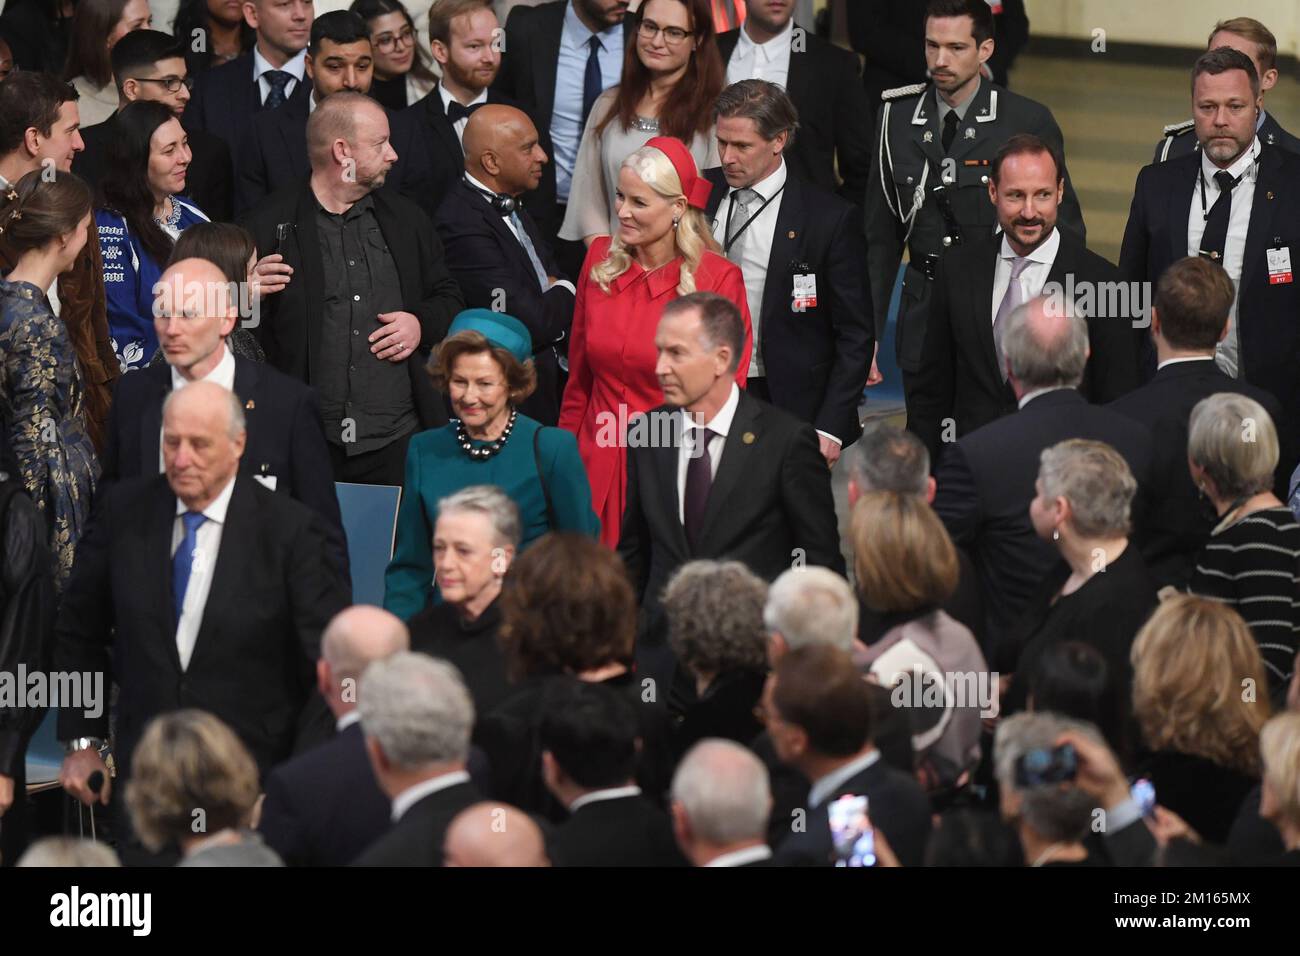 Oslo, Norway. 10th Dec, 2022. King Harald V of Norway, Norwegian Nobel Committee chairwoman Berit Reiss-Andersen, Queen Sonja of Norway, Crown Princess Mette-Marit of Norway and Crown Prince Haakon of Norway attend the 2022 Nobel Peace Prize award ceremony at the City Hall in Oslo, Norway on December 10, 2022. Photo by Paul Treadway/ Credit: UPI/Alamy Live News Stock Photo